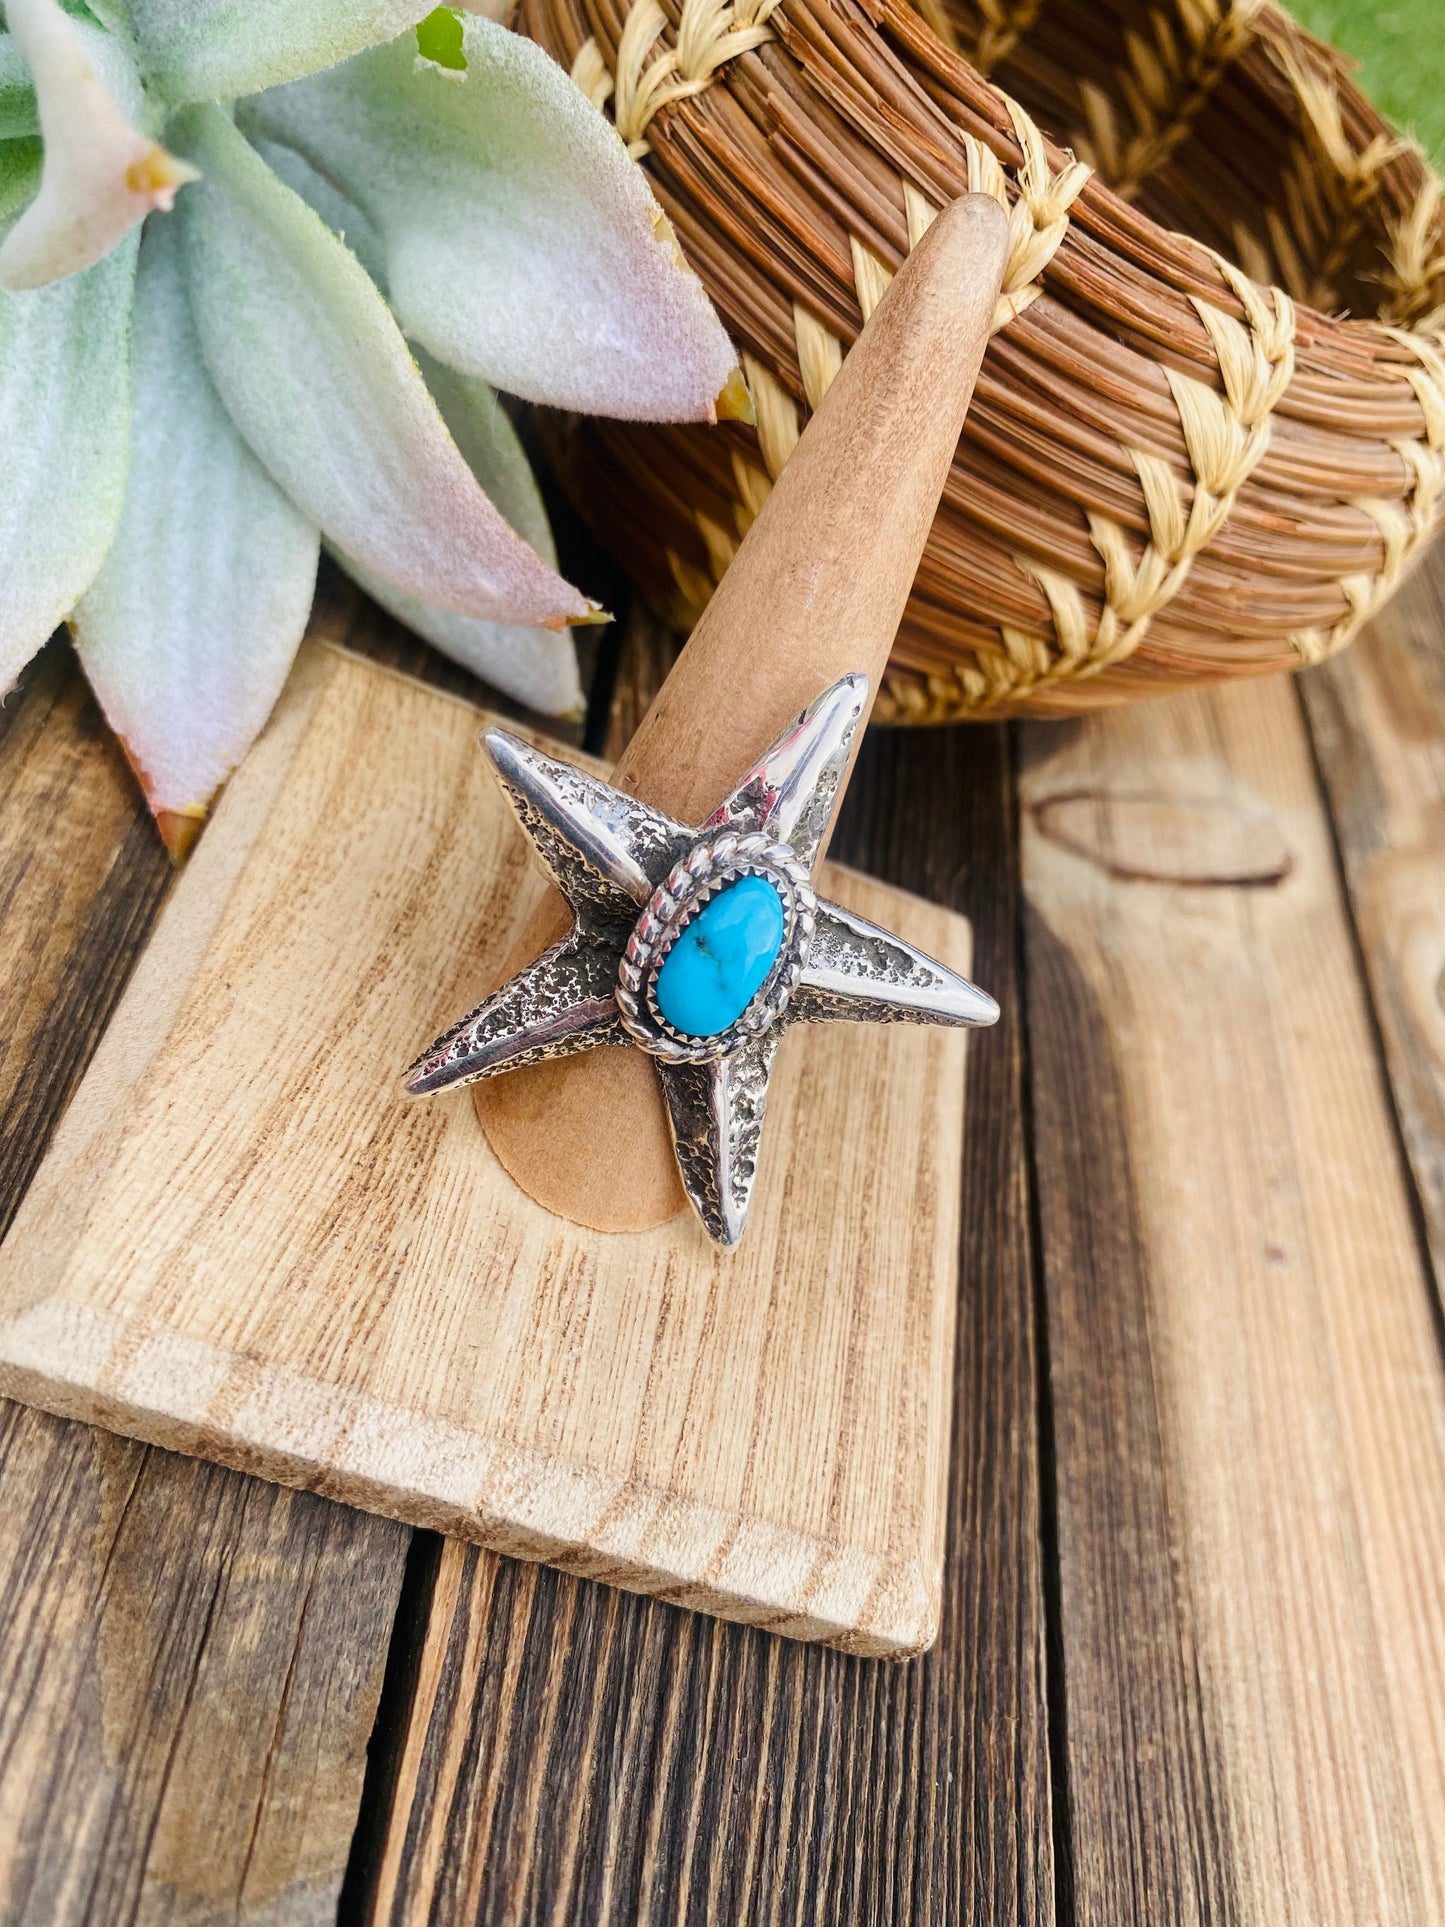 Navajo Turquoise & Sterling Silver Star Ring Size 7.5 Signed